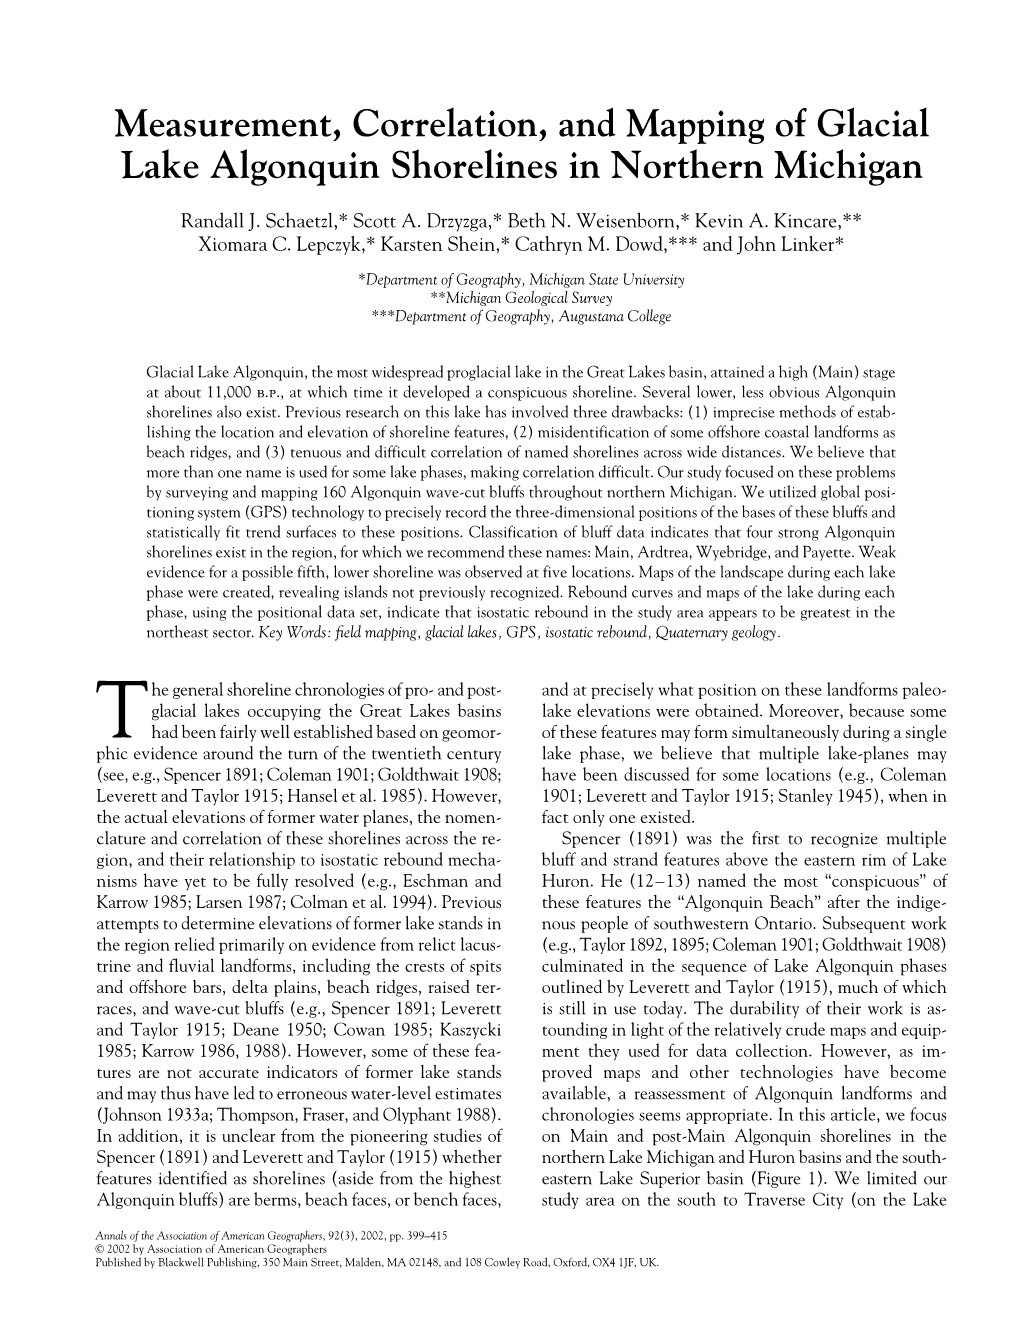 Measurement, Correlation, and Mapping of Glacial Lake Algonquin Shorelines in Northern Michigan